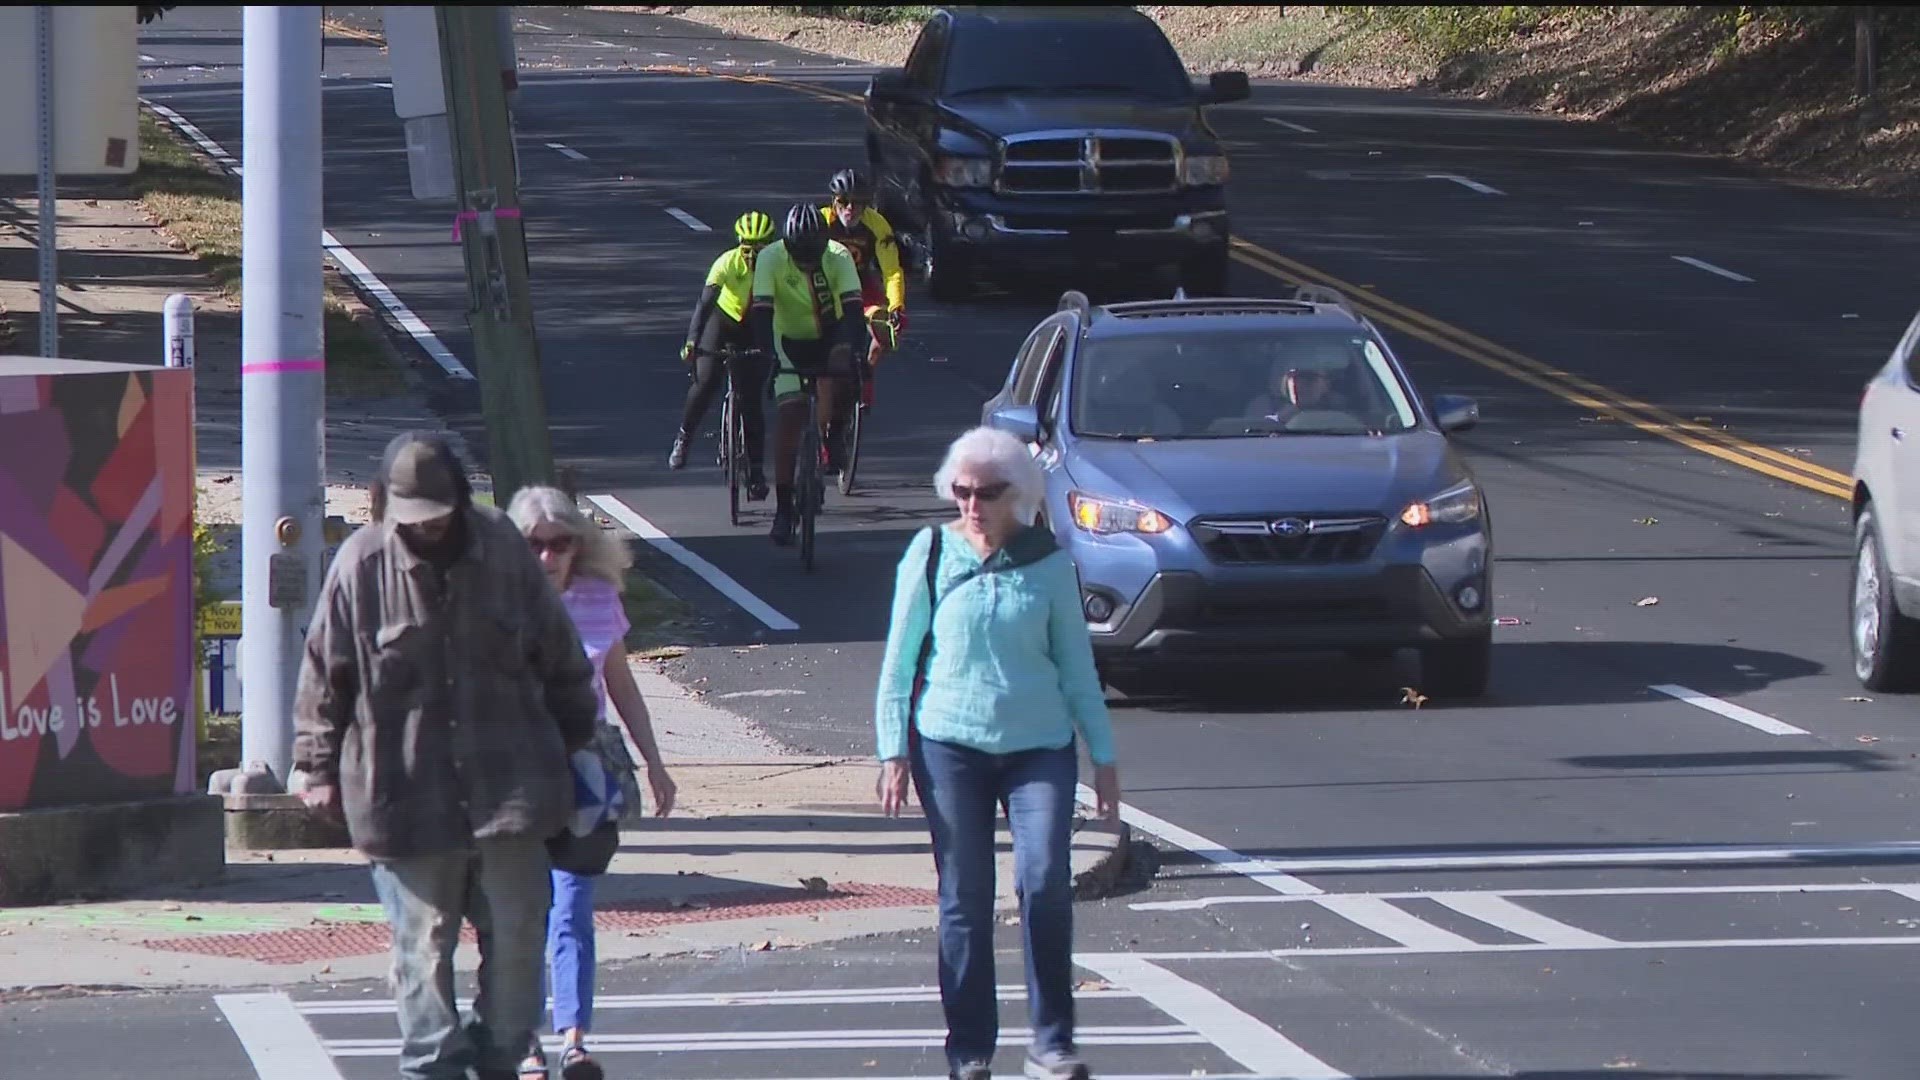 The group claims there are major safety issues on Decatur streets, including dangerous drivers.